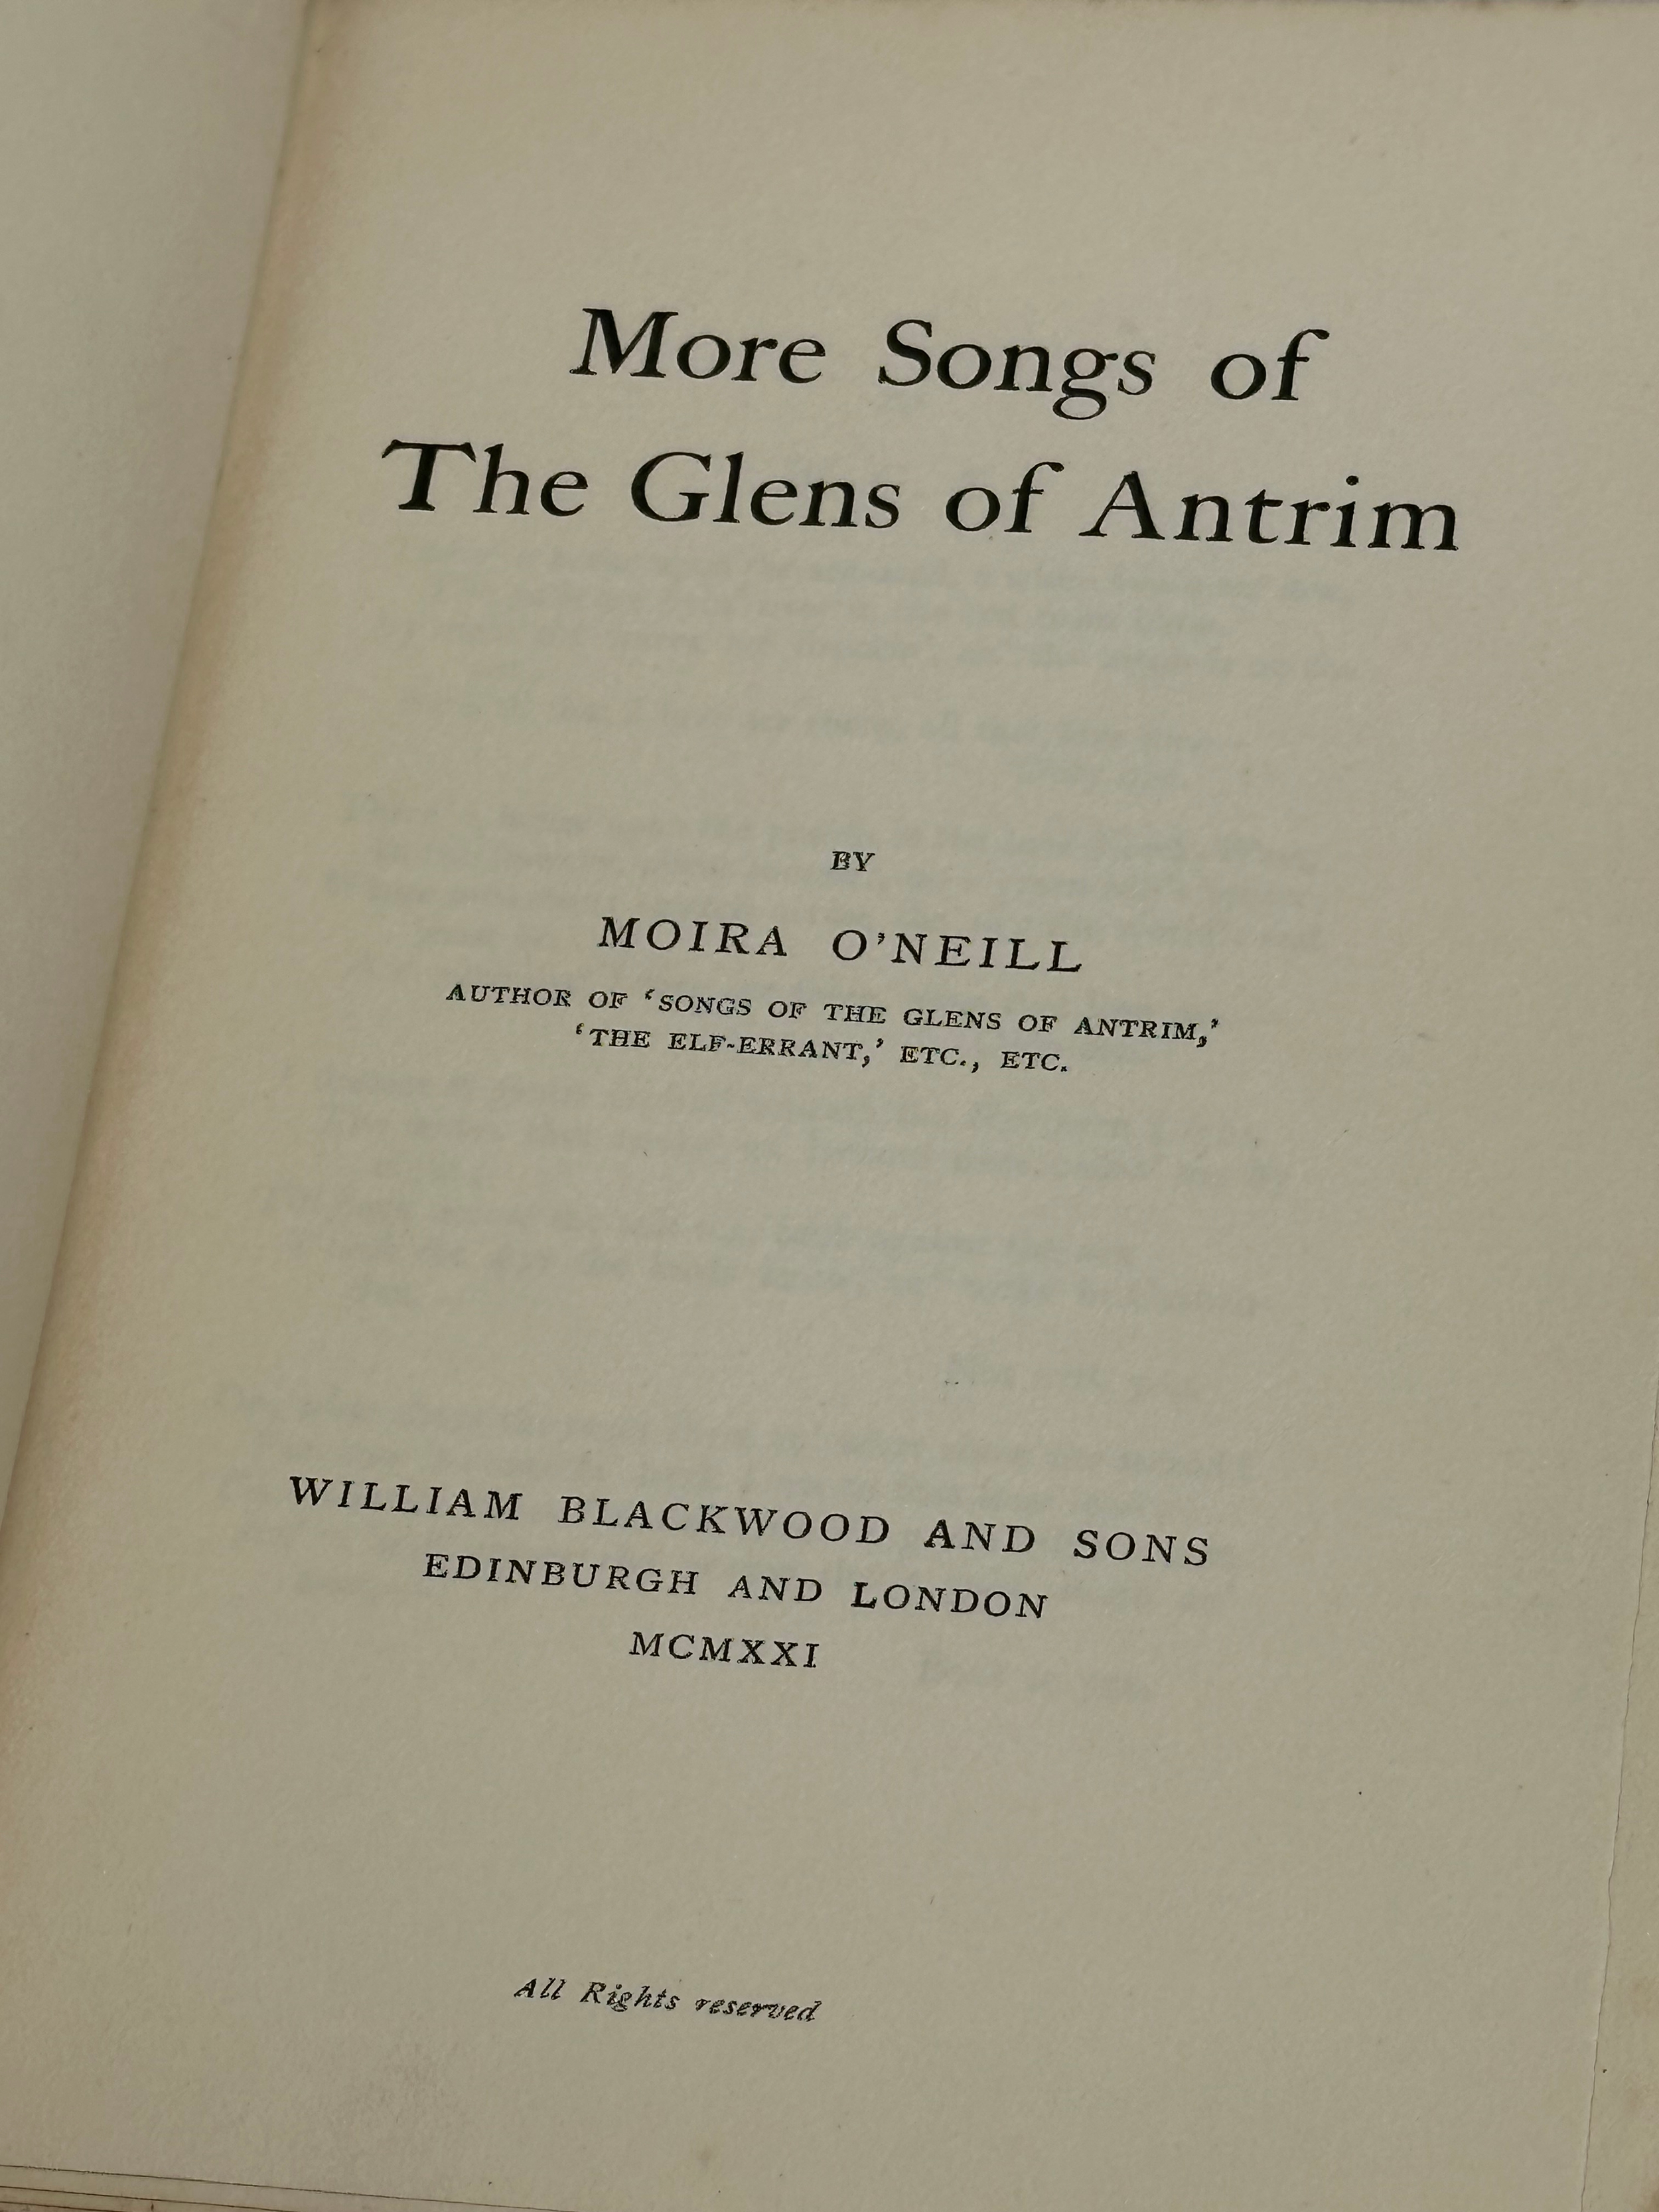 An Early 20th Century First Edition book on More Songs of the Glens of Antrim by Moira O’Neill. - Image 5 of 5